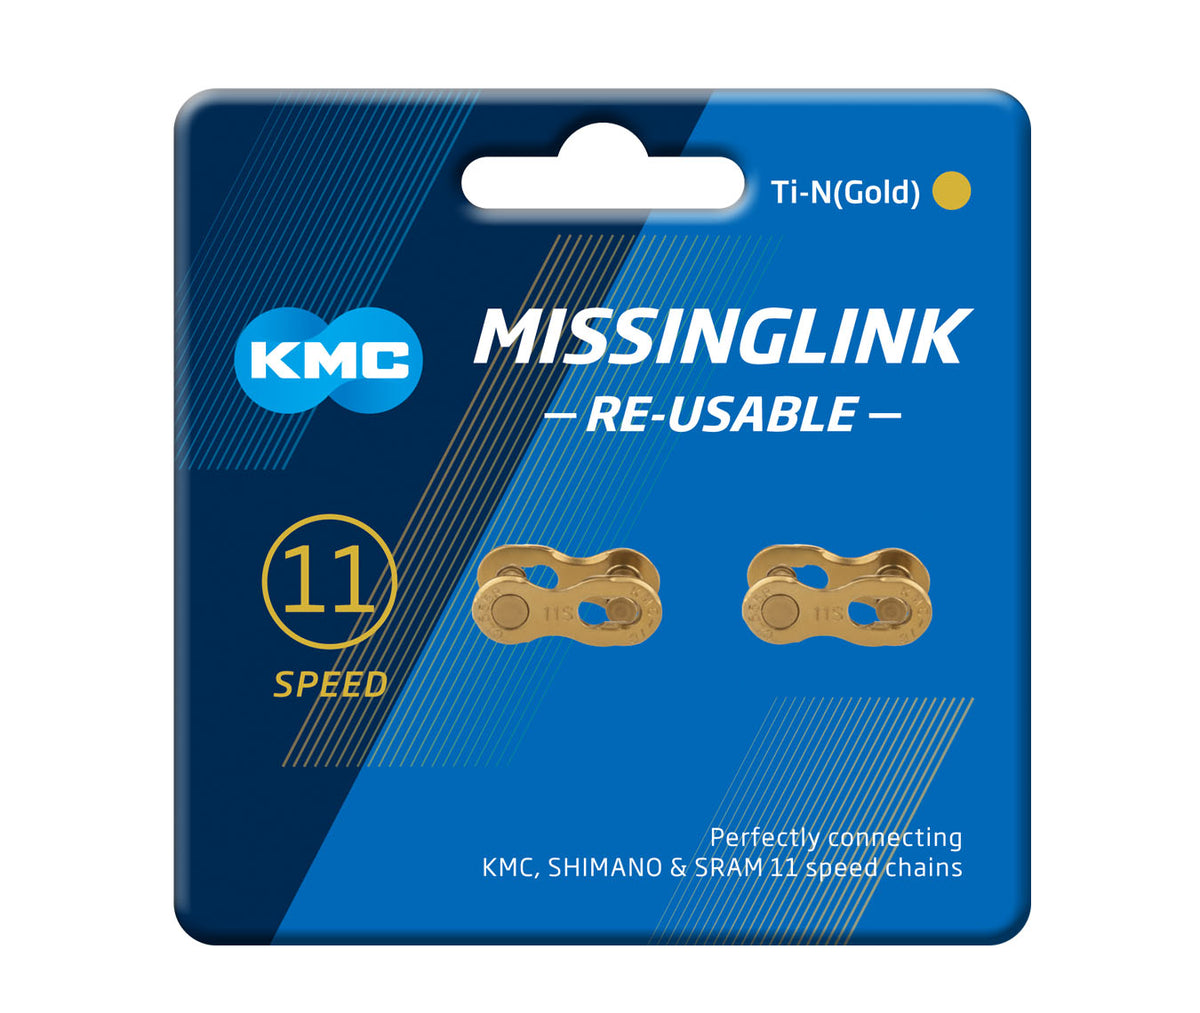 KMC Missinglink Re-Usable 11 Speed Gold